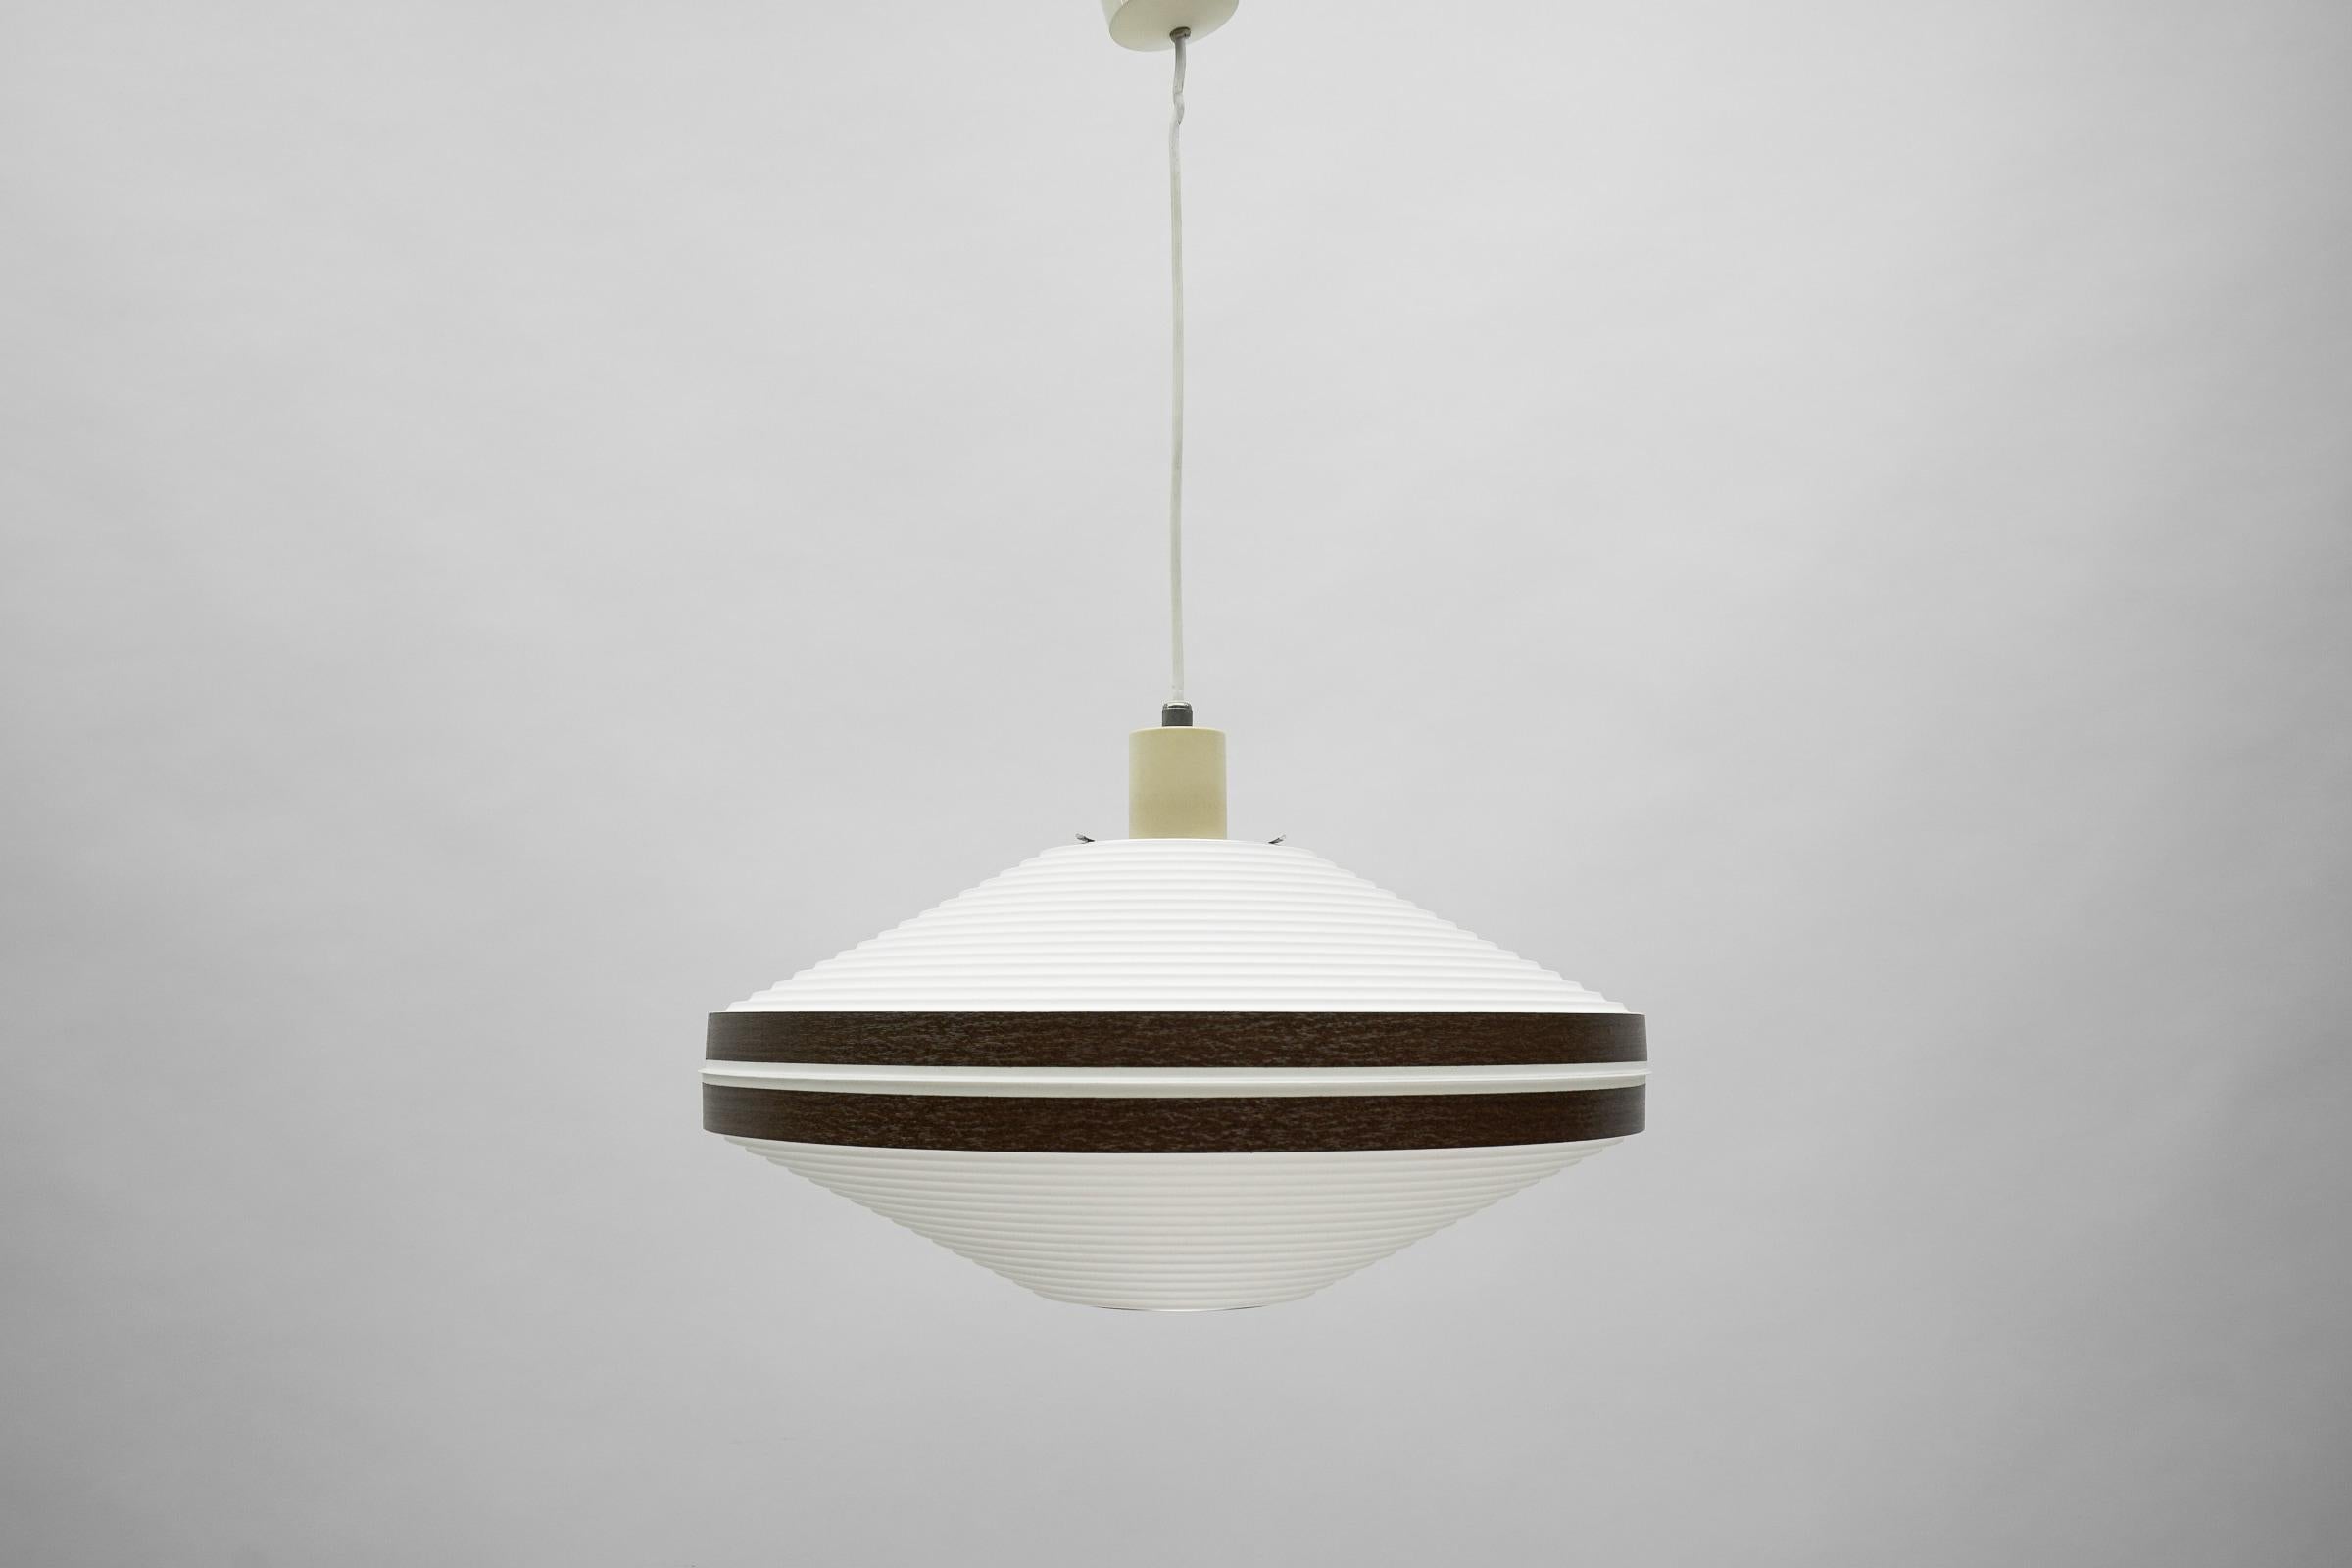 Ceiling Lamp by Aloys F. Gangkofner for Erco Leuchten, Germany Lüdenscheid 1960s.

A very interesting and decorative lamp. 

1 x E27 Edison screw fit bulb holder, is rewired and in working condition. It runs both on 110/230 Volt.